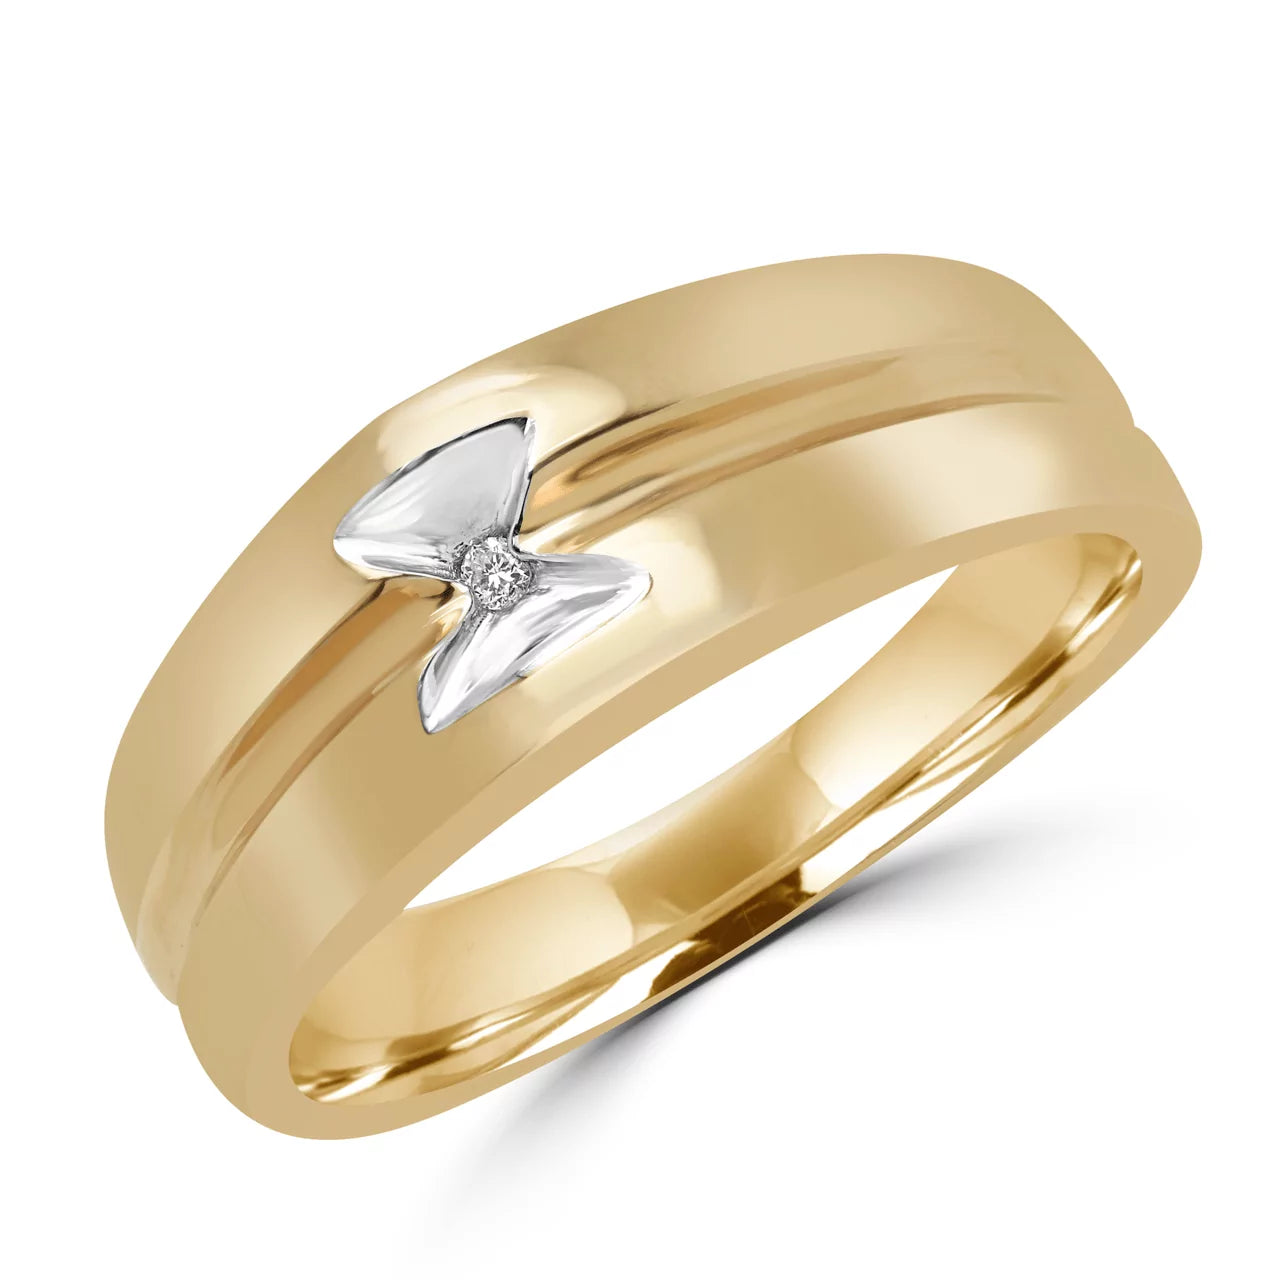 Round diamond solitaire men’s stylish ring in yellow gold